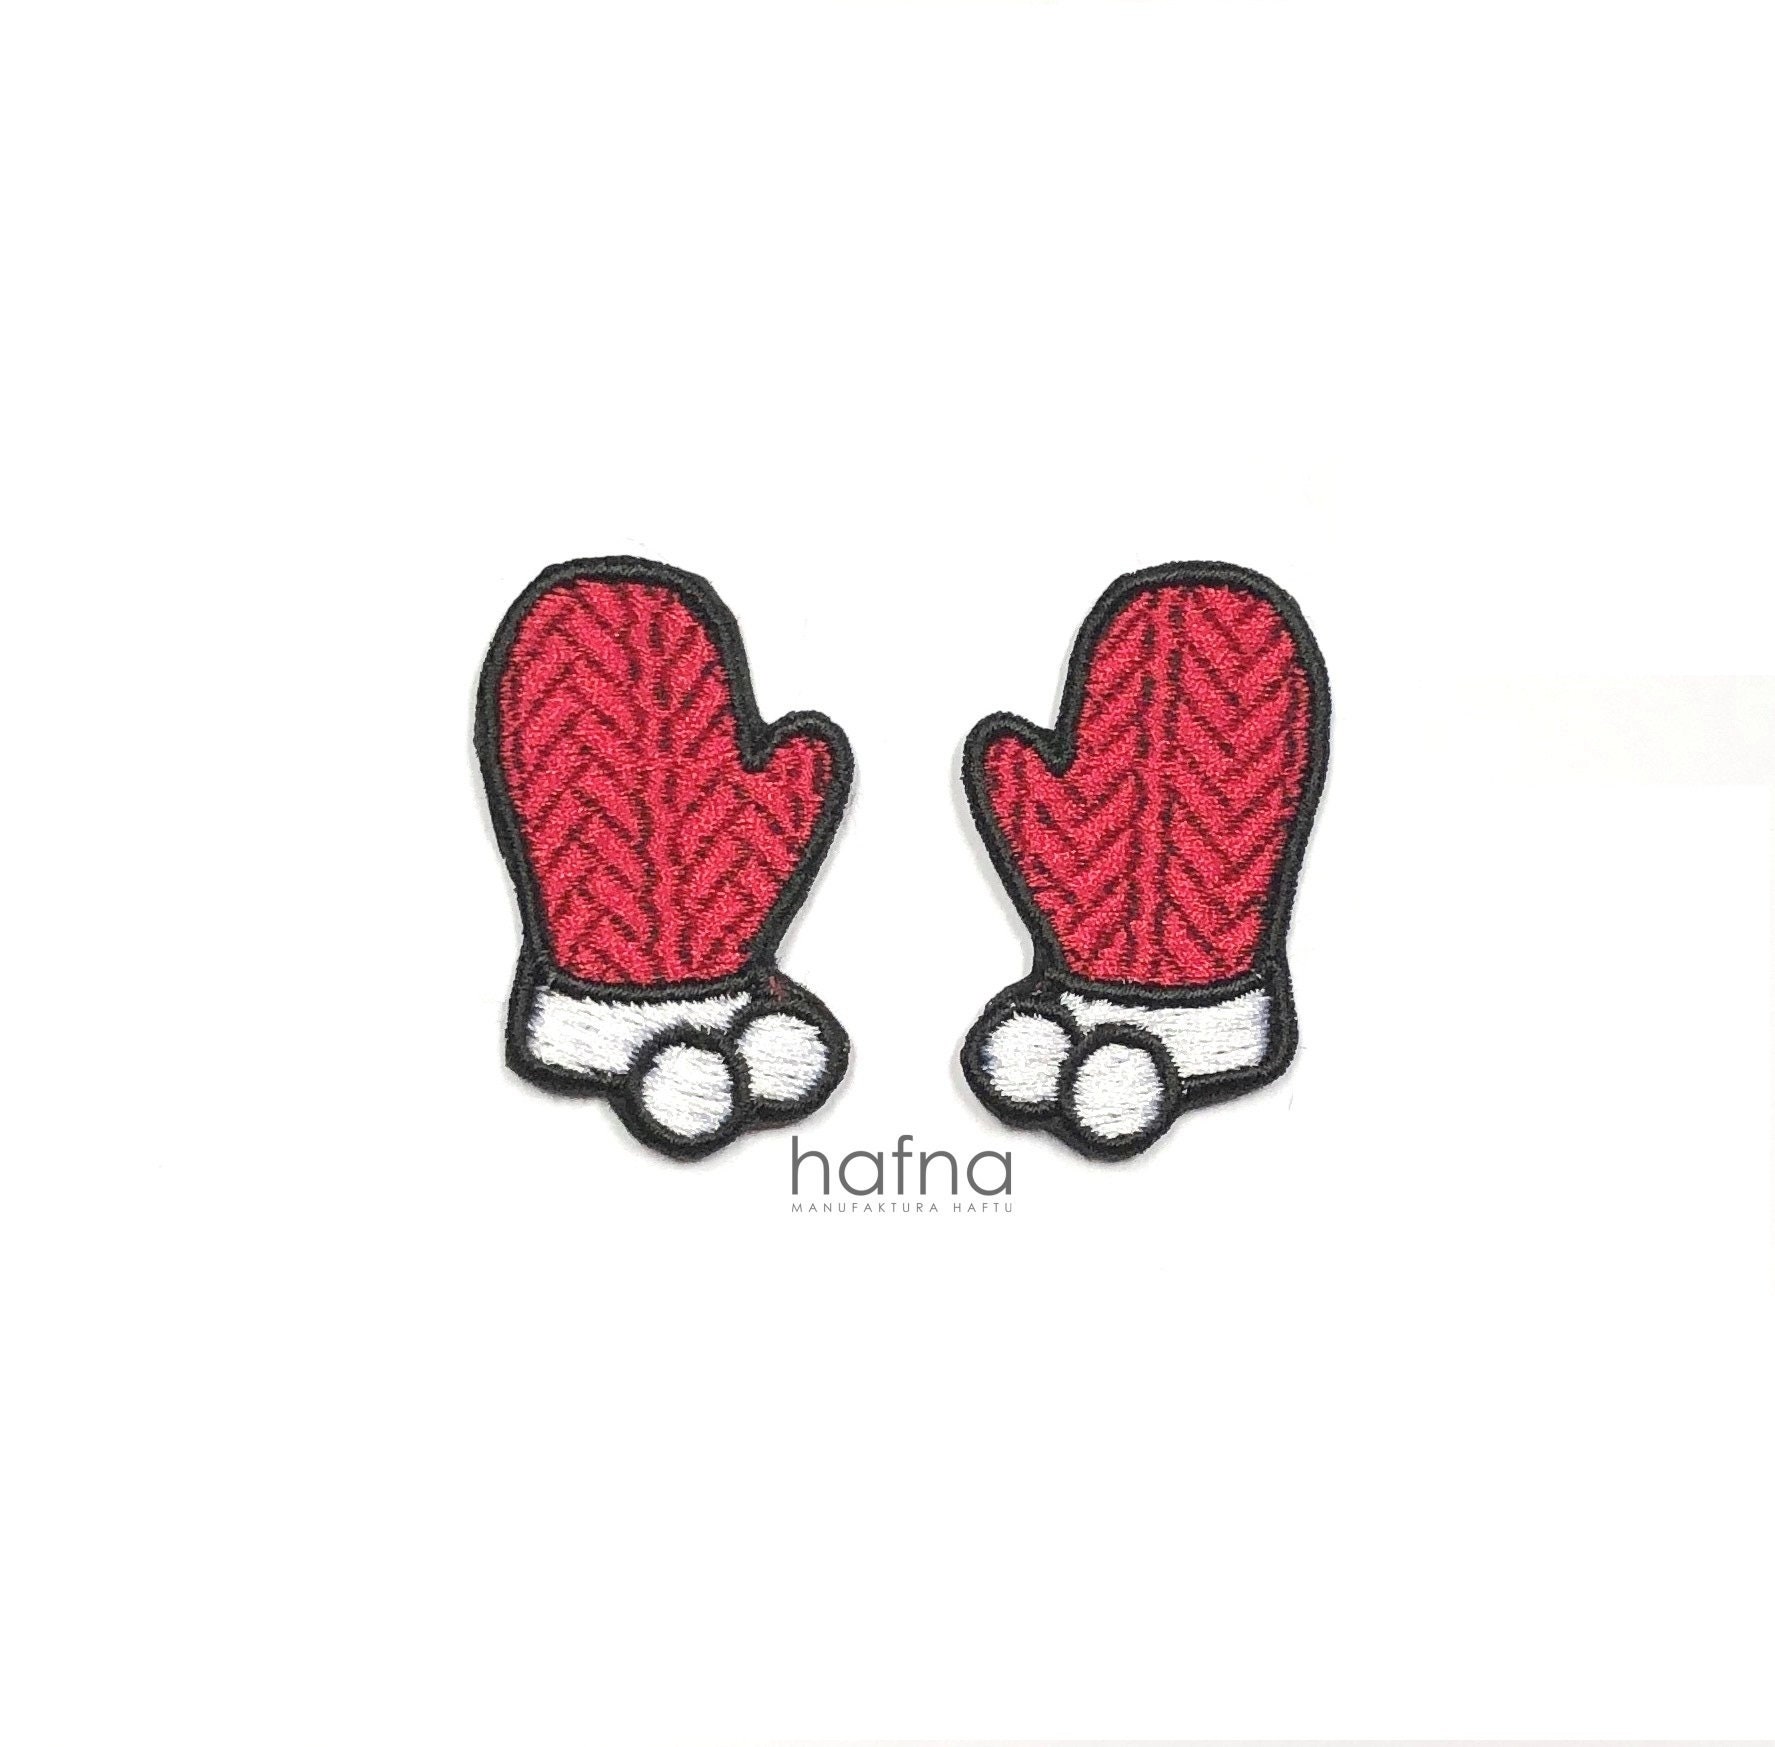 Red Little Heart Patch Sew on Patch Naszywka Embroidered Patch Applique  Patches for Jackets Patches for Bags for T-shirt DIY 